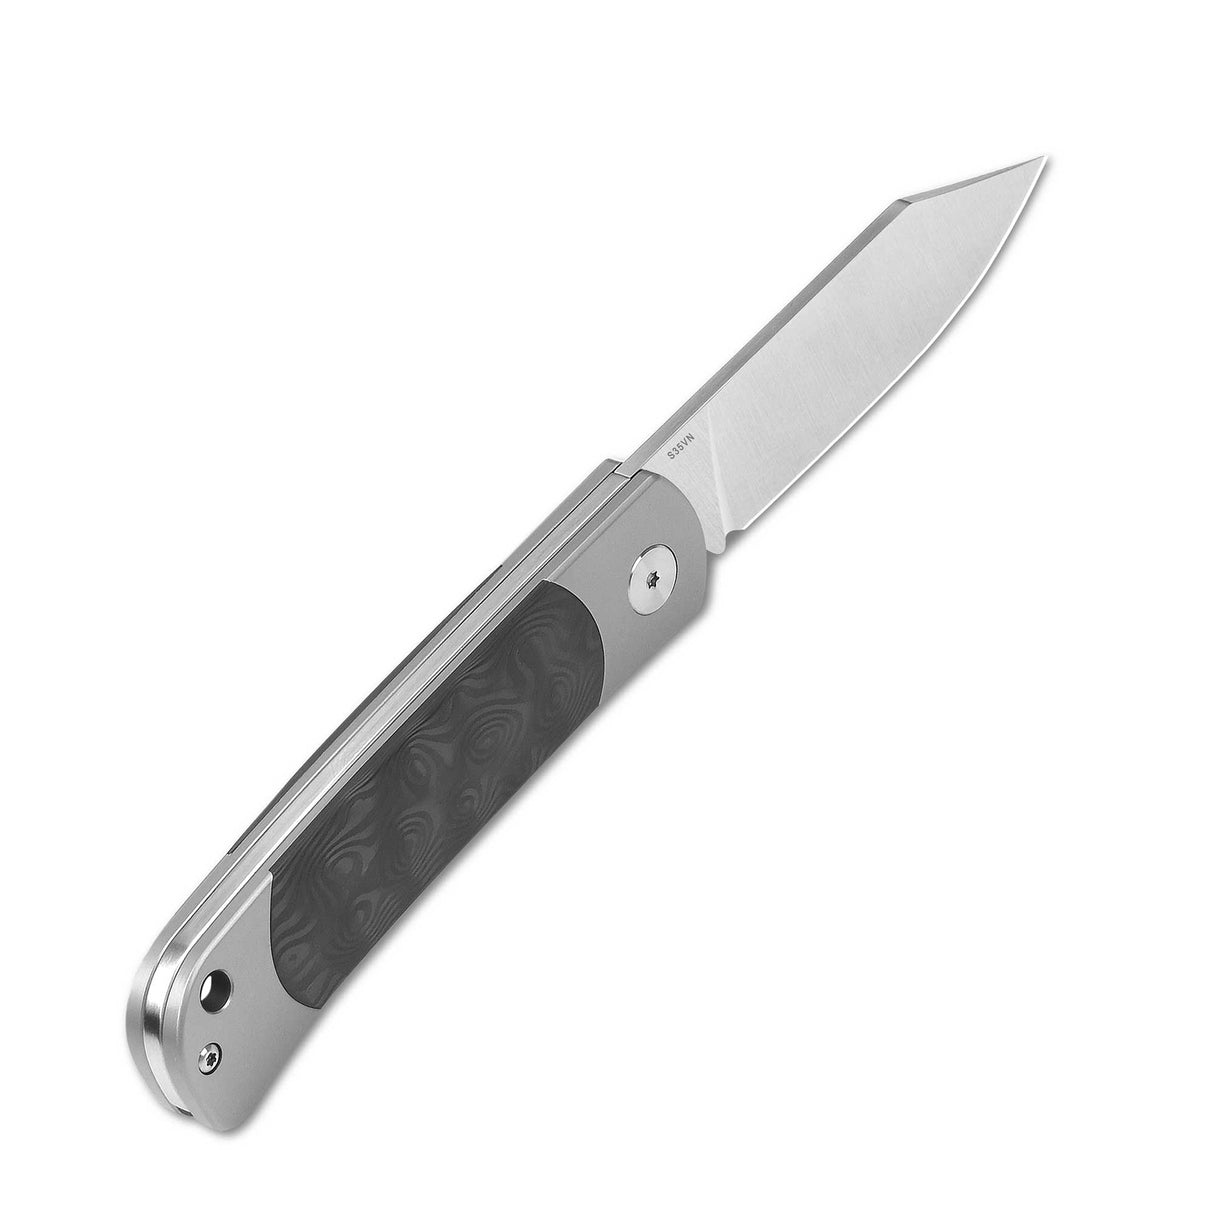 QSP Falcon Slip Joint Pocket Knife S35VN Blade Titanium Handle with Marbled CF Insert